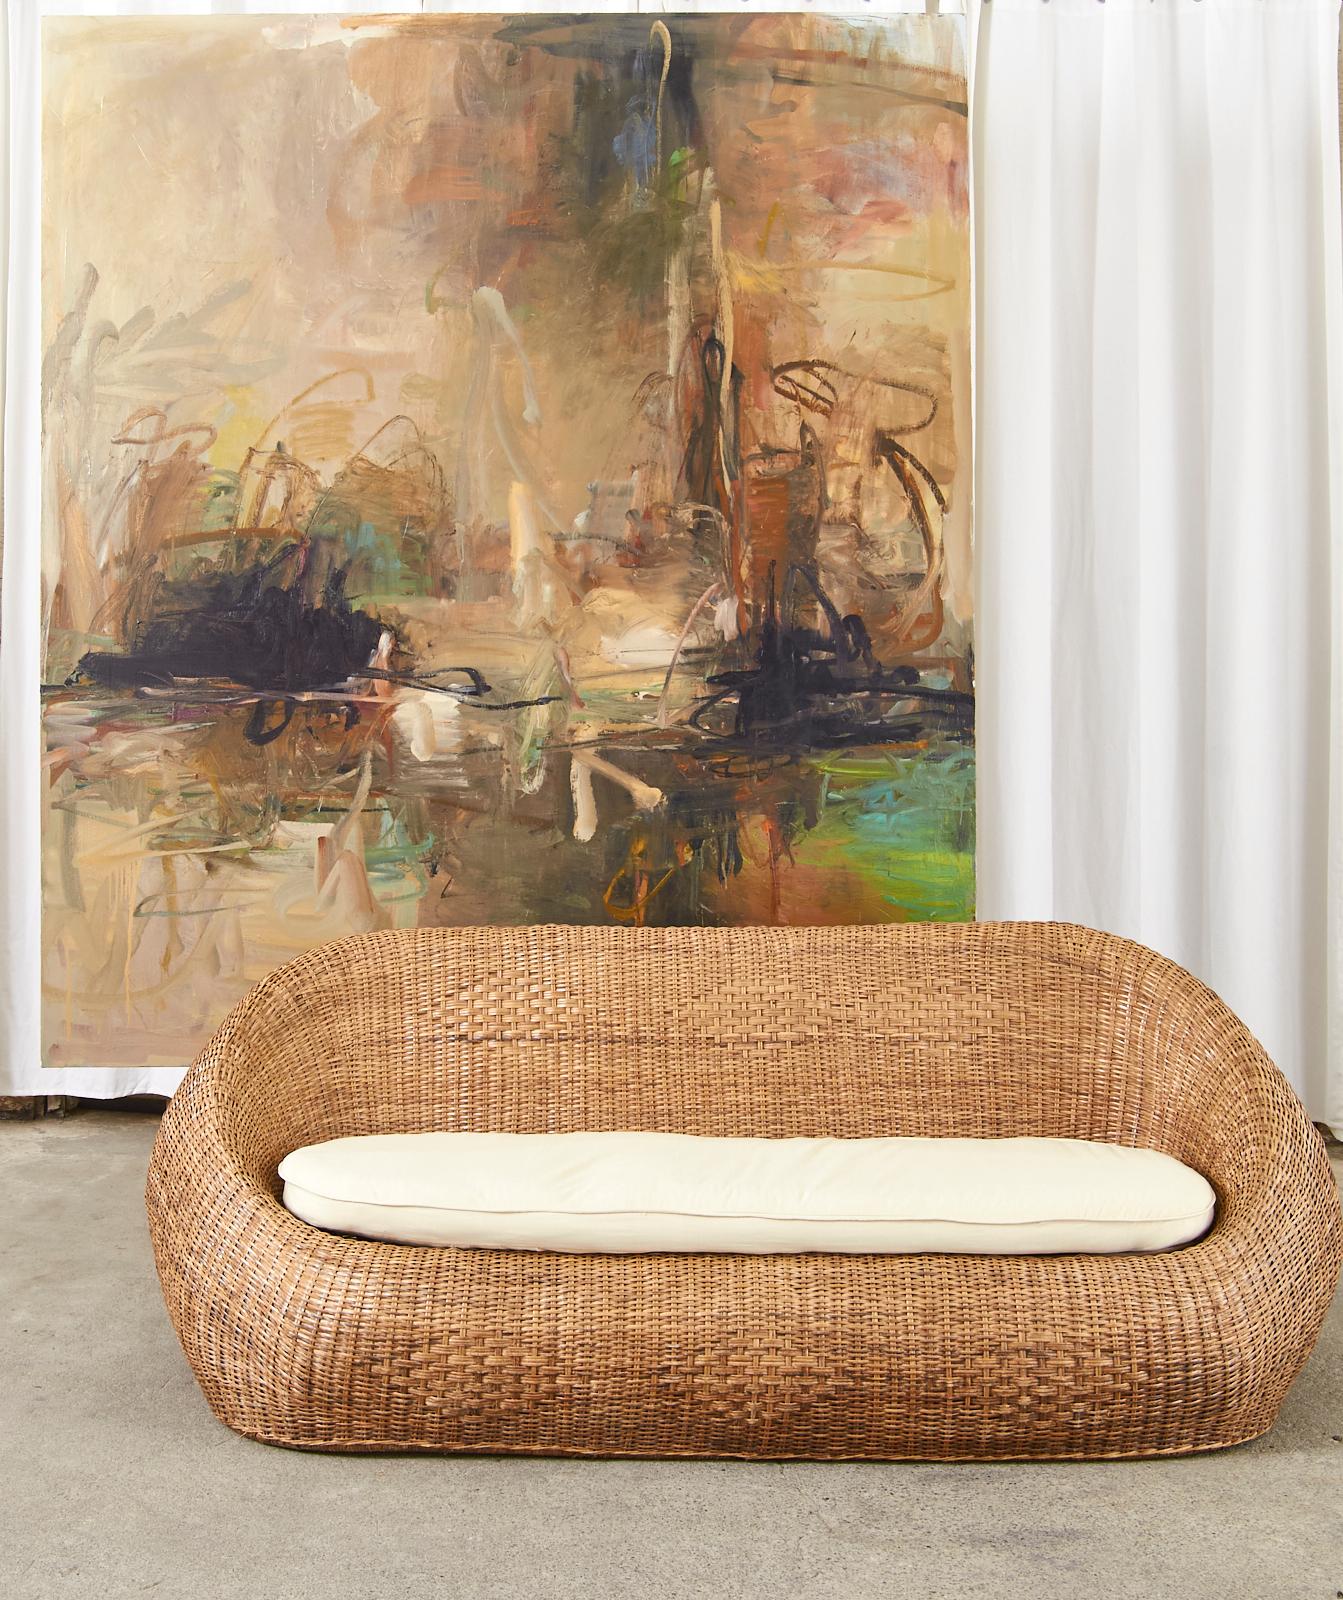 Fantastic oversized, bulbous form sofa settees featuring rattan frames covered with woven wicker. The  modern designs of the sofas touch on biomorphism, while being grounded in natural organic materials. The matching pair have a subtle geometric